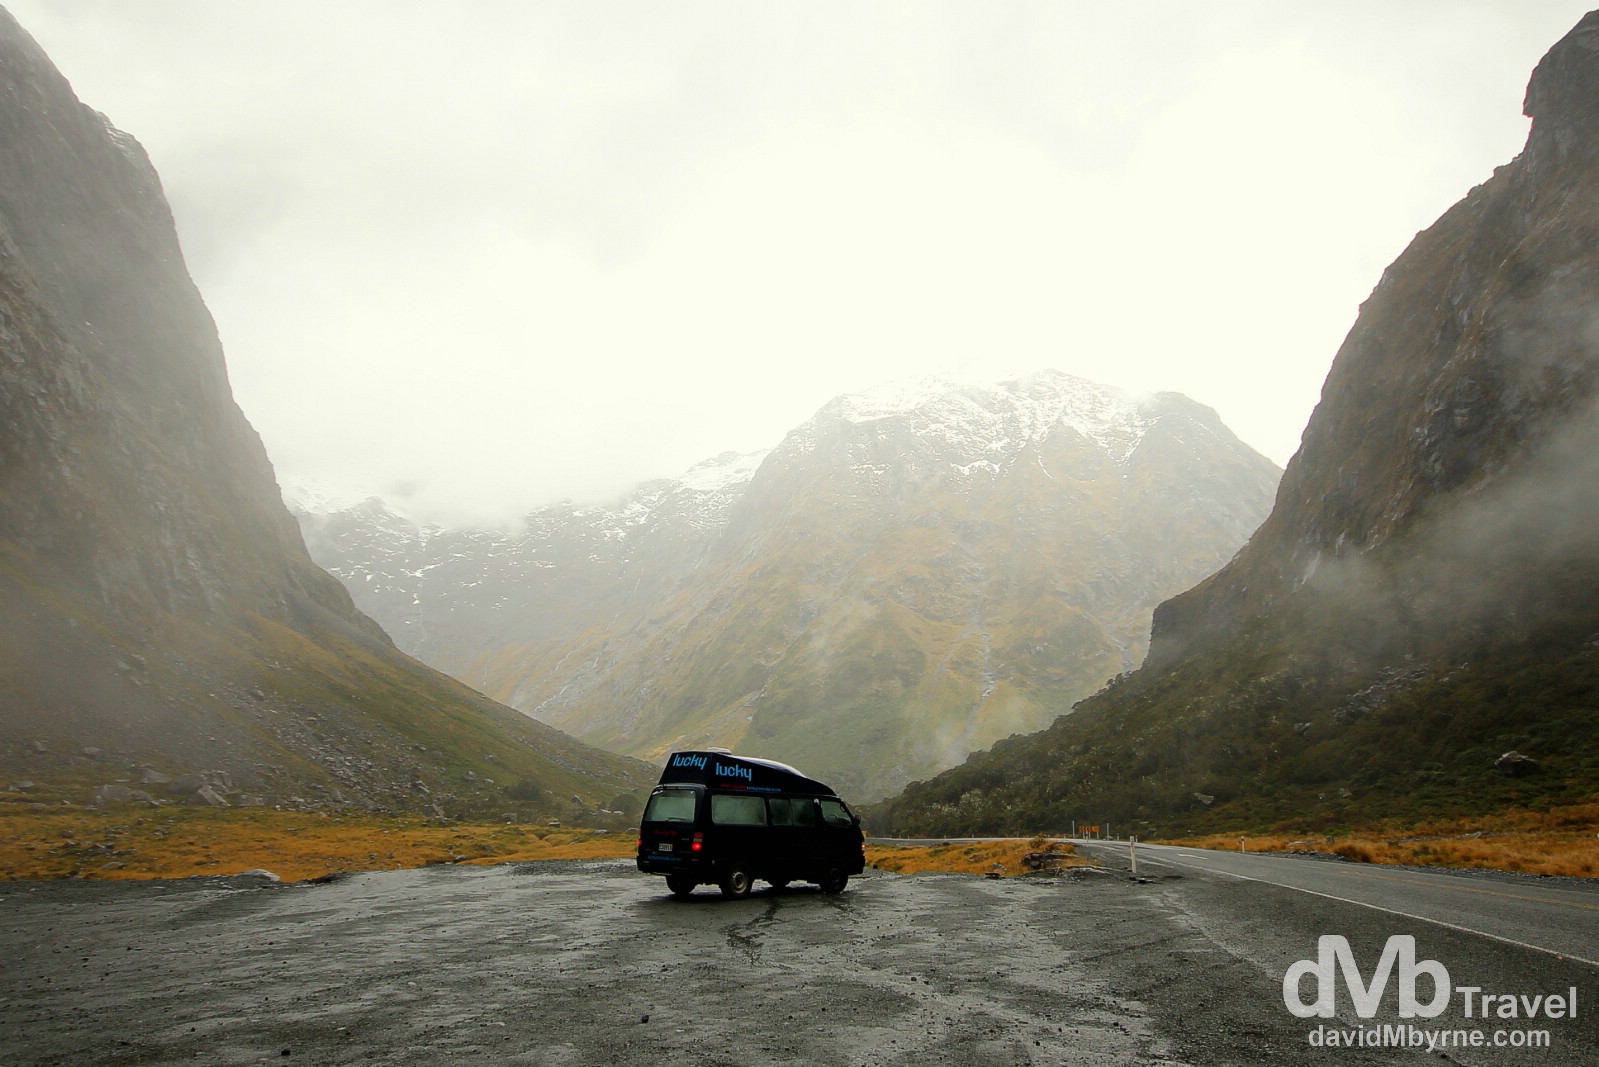 A camper van parked outside the eastern entrance to the Homer Tunnel in Fiordland, South Island, New Zealand. May 26th 2012.